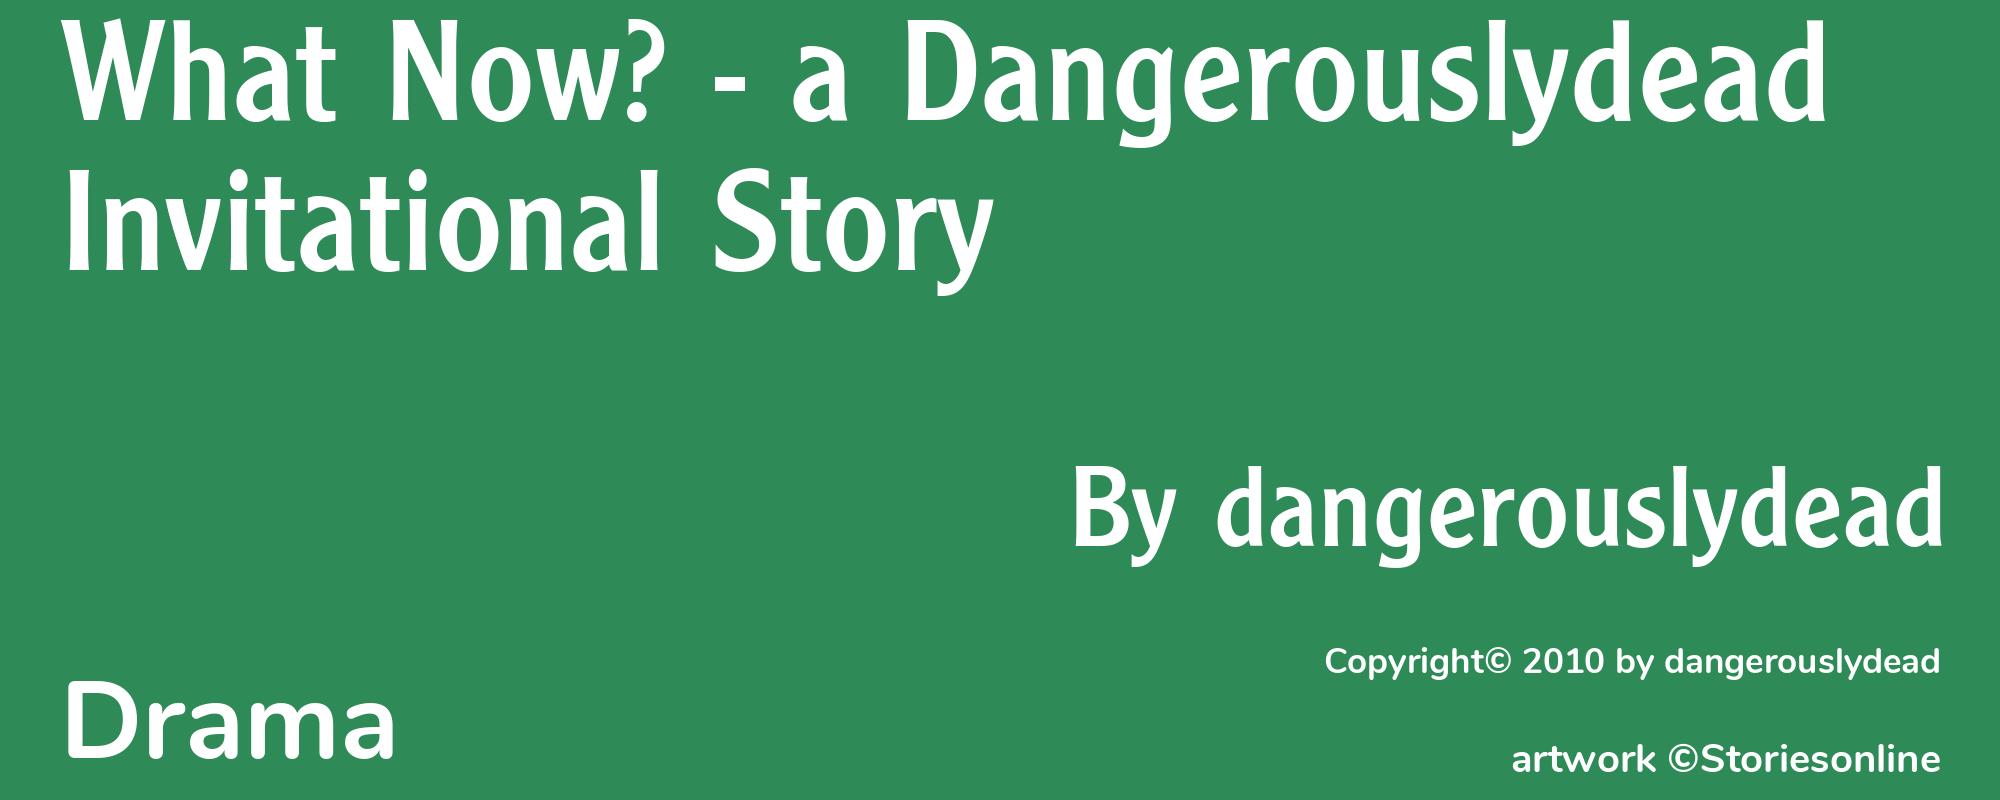 What Now? - a Dangerouslydead Invitational Story - Cover